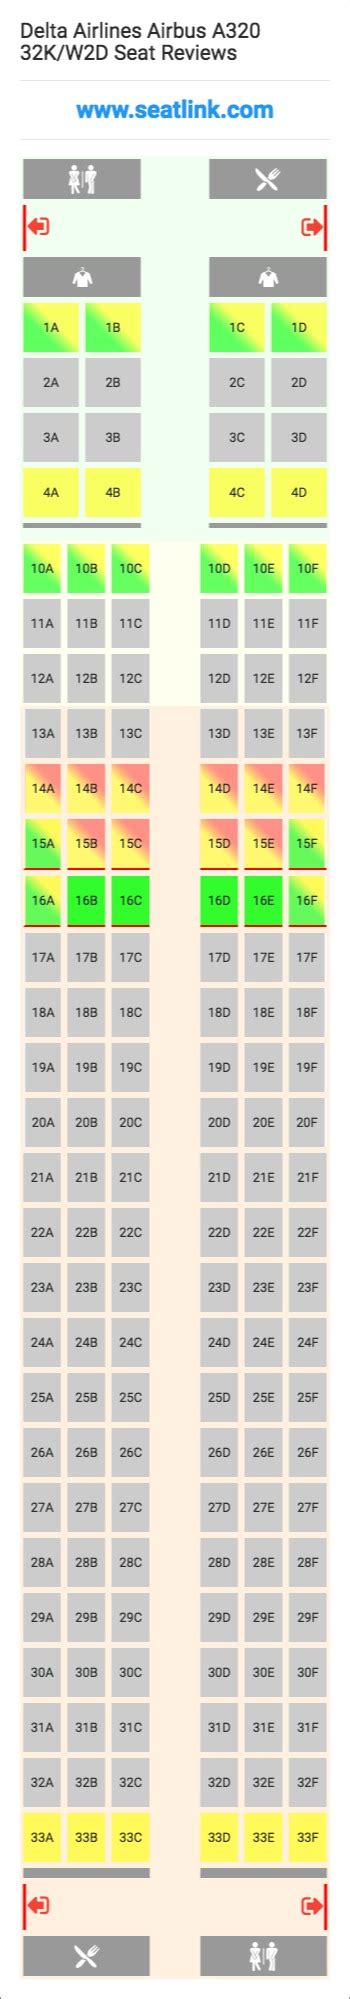 Delta Airlines Airbus A320 32kw2d Seating Chart Updated April 2022